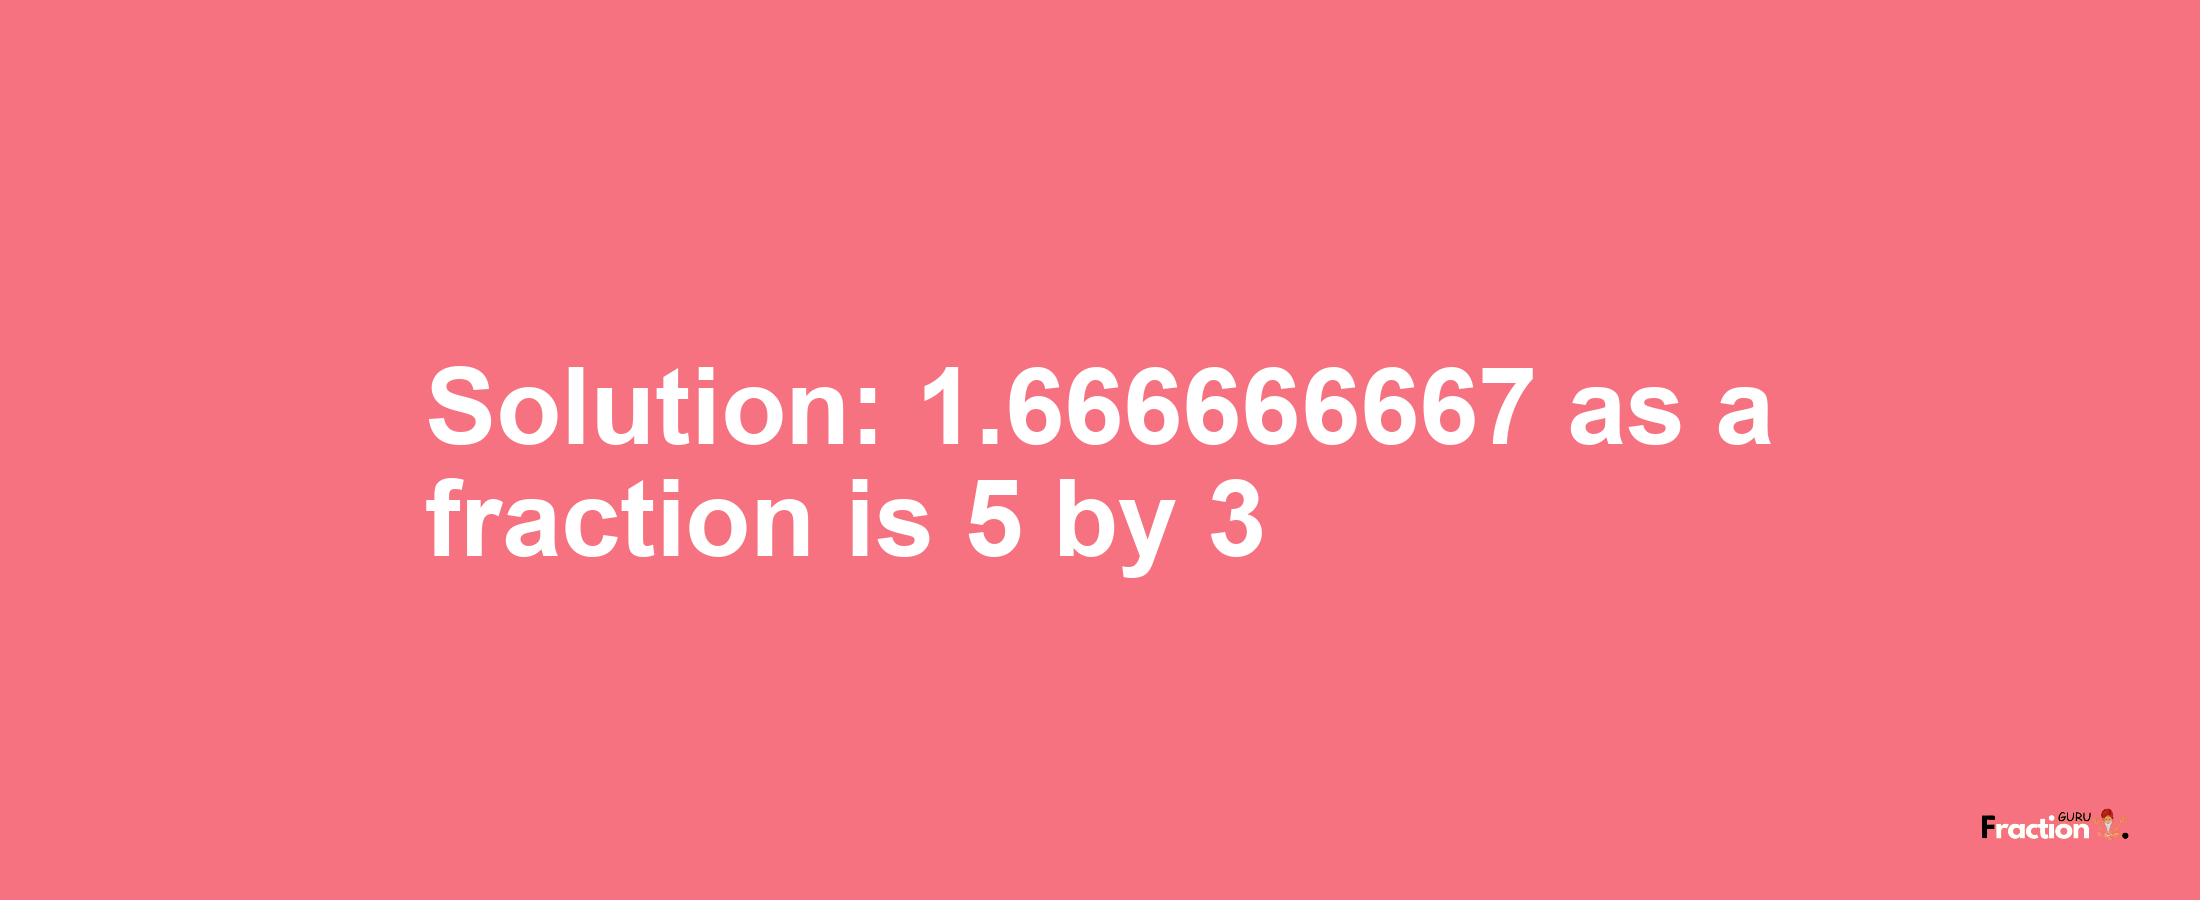 Solution:1.666666667 as a fraction is 5/3